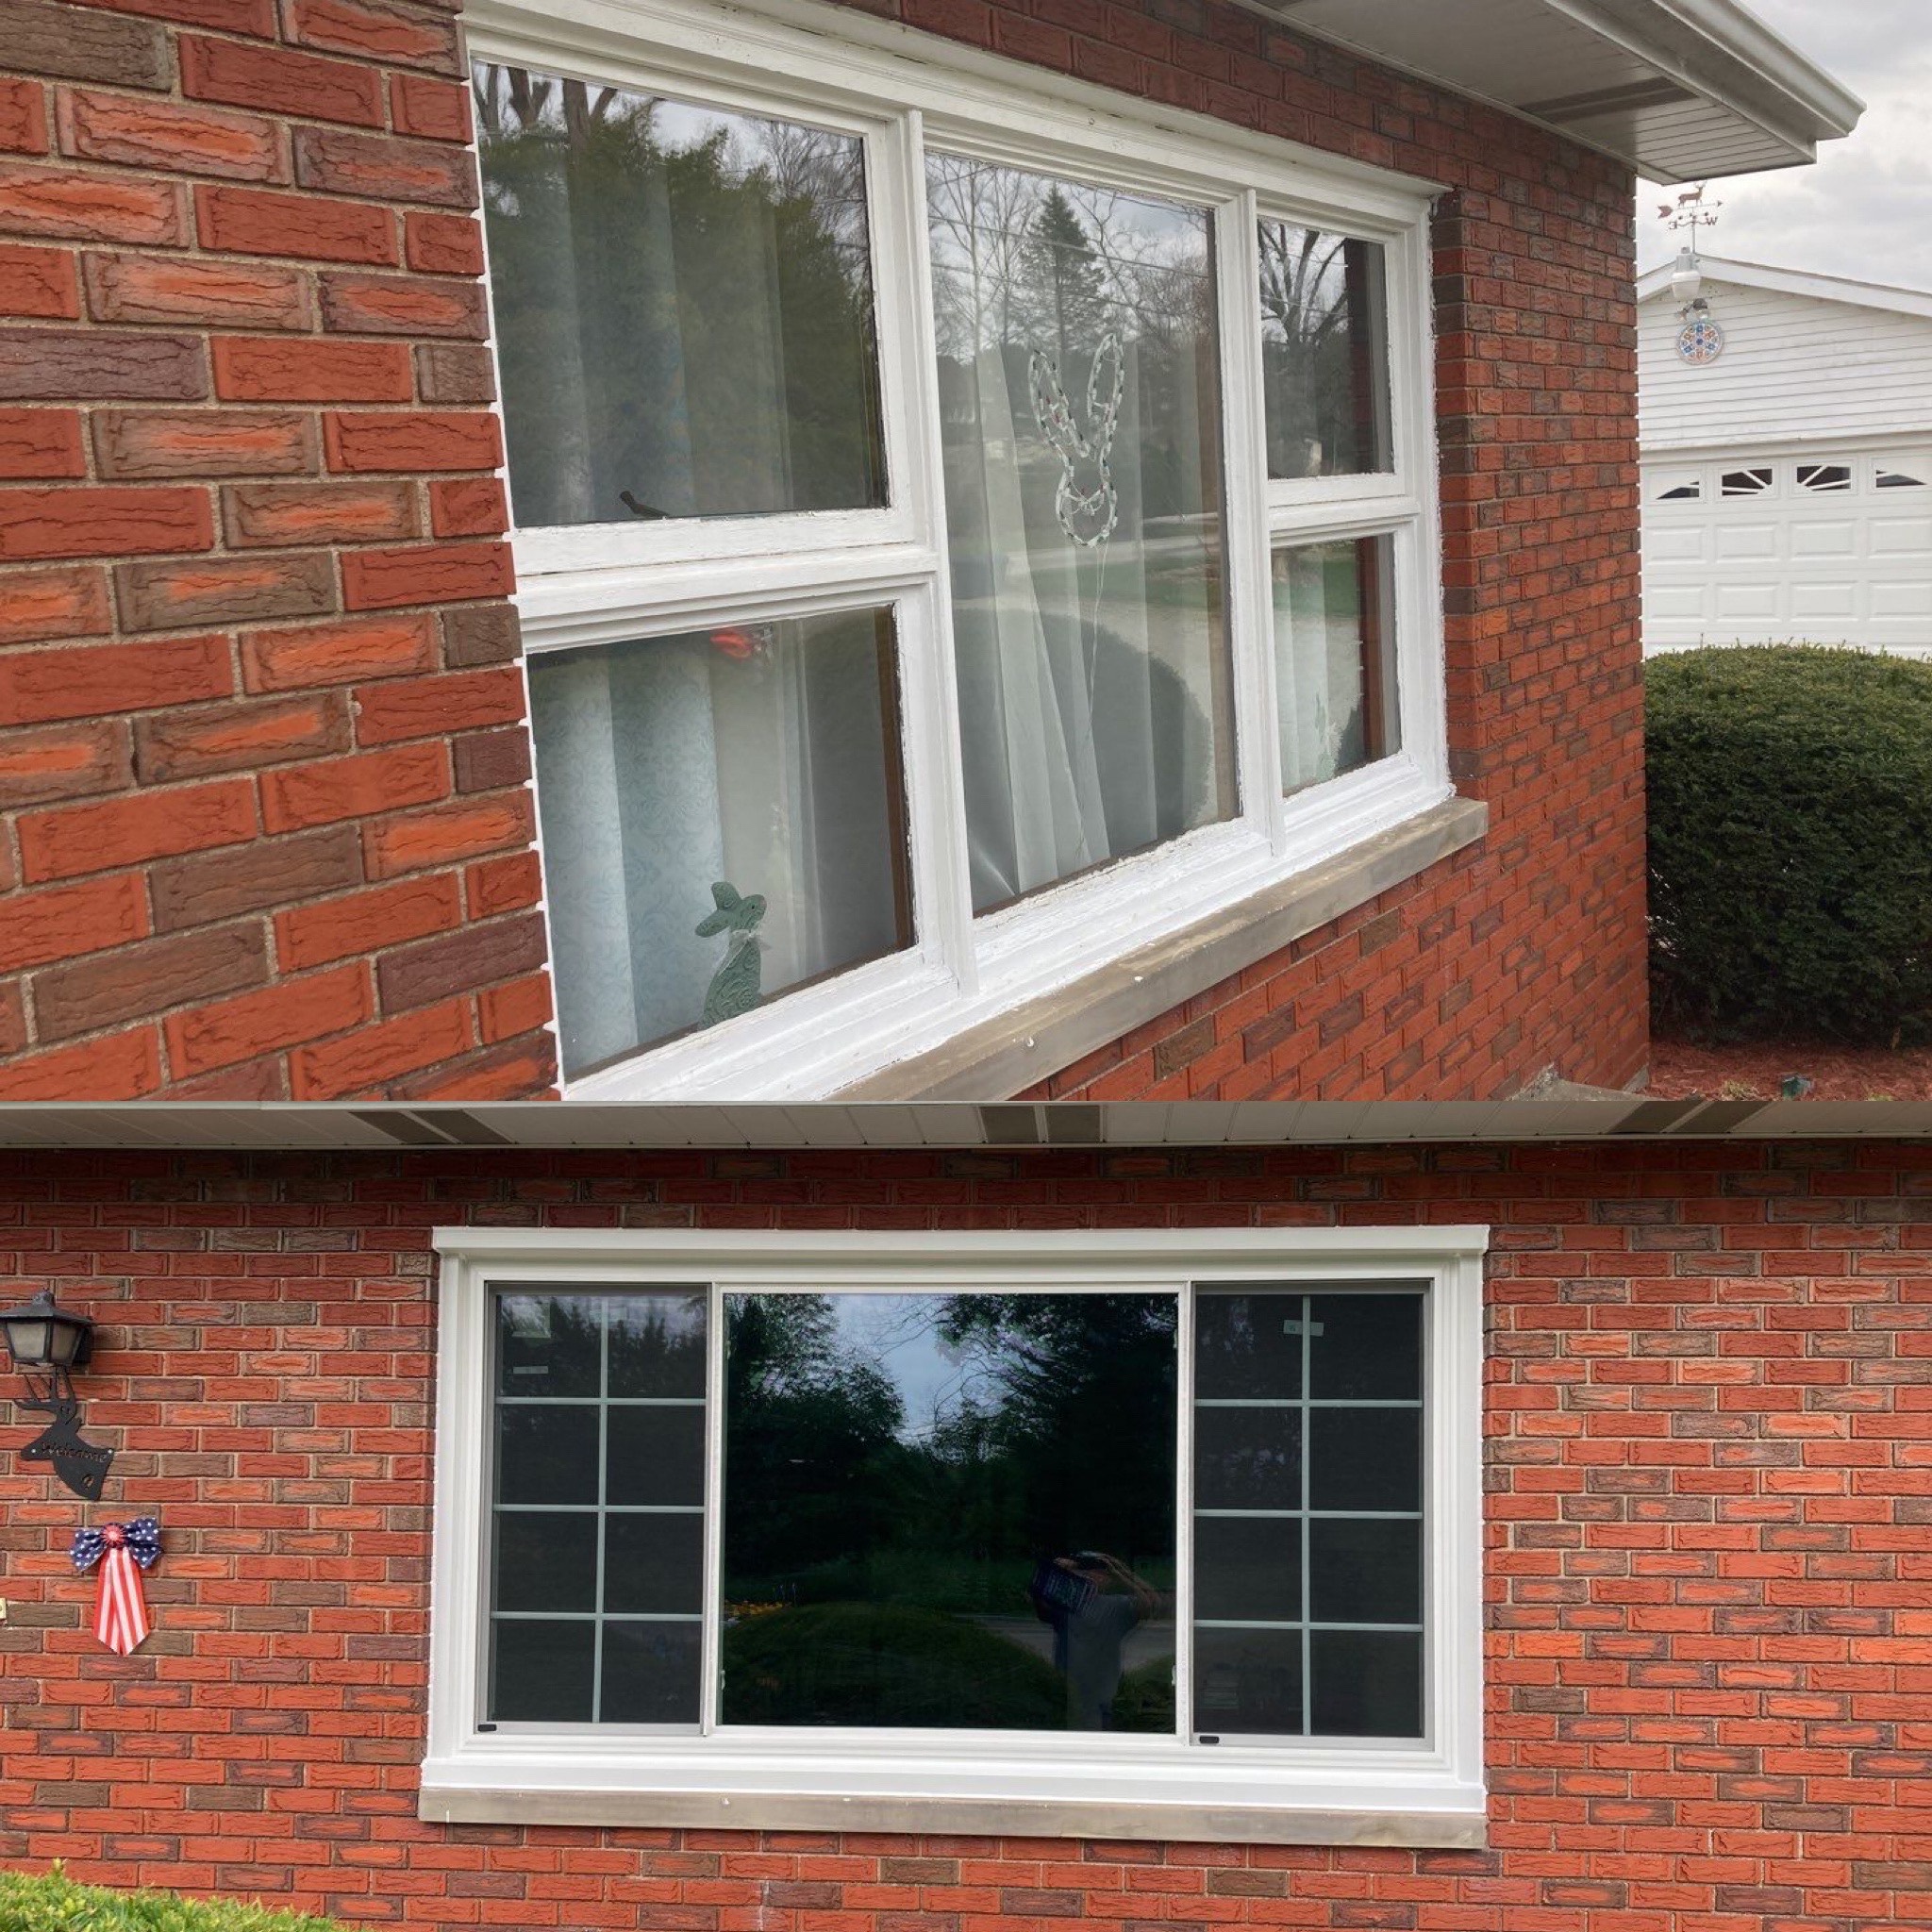 Before and After Window